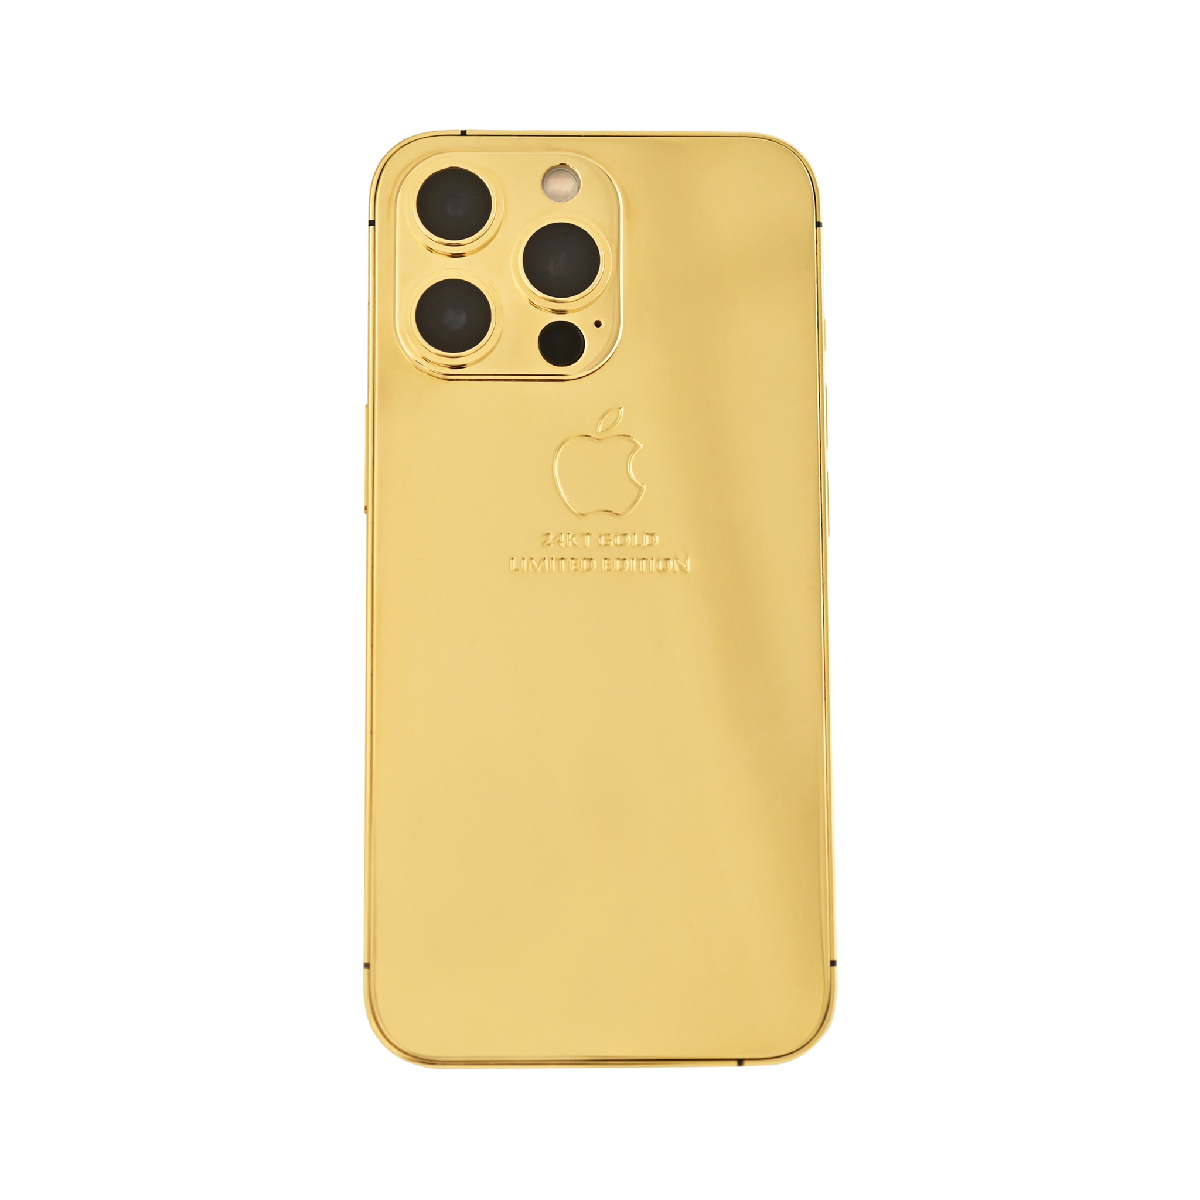 Caviar Luxury 24k Full Gold Customized iPhone 14 Pro Max 256 GB Limited Edition